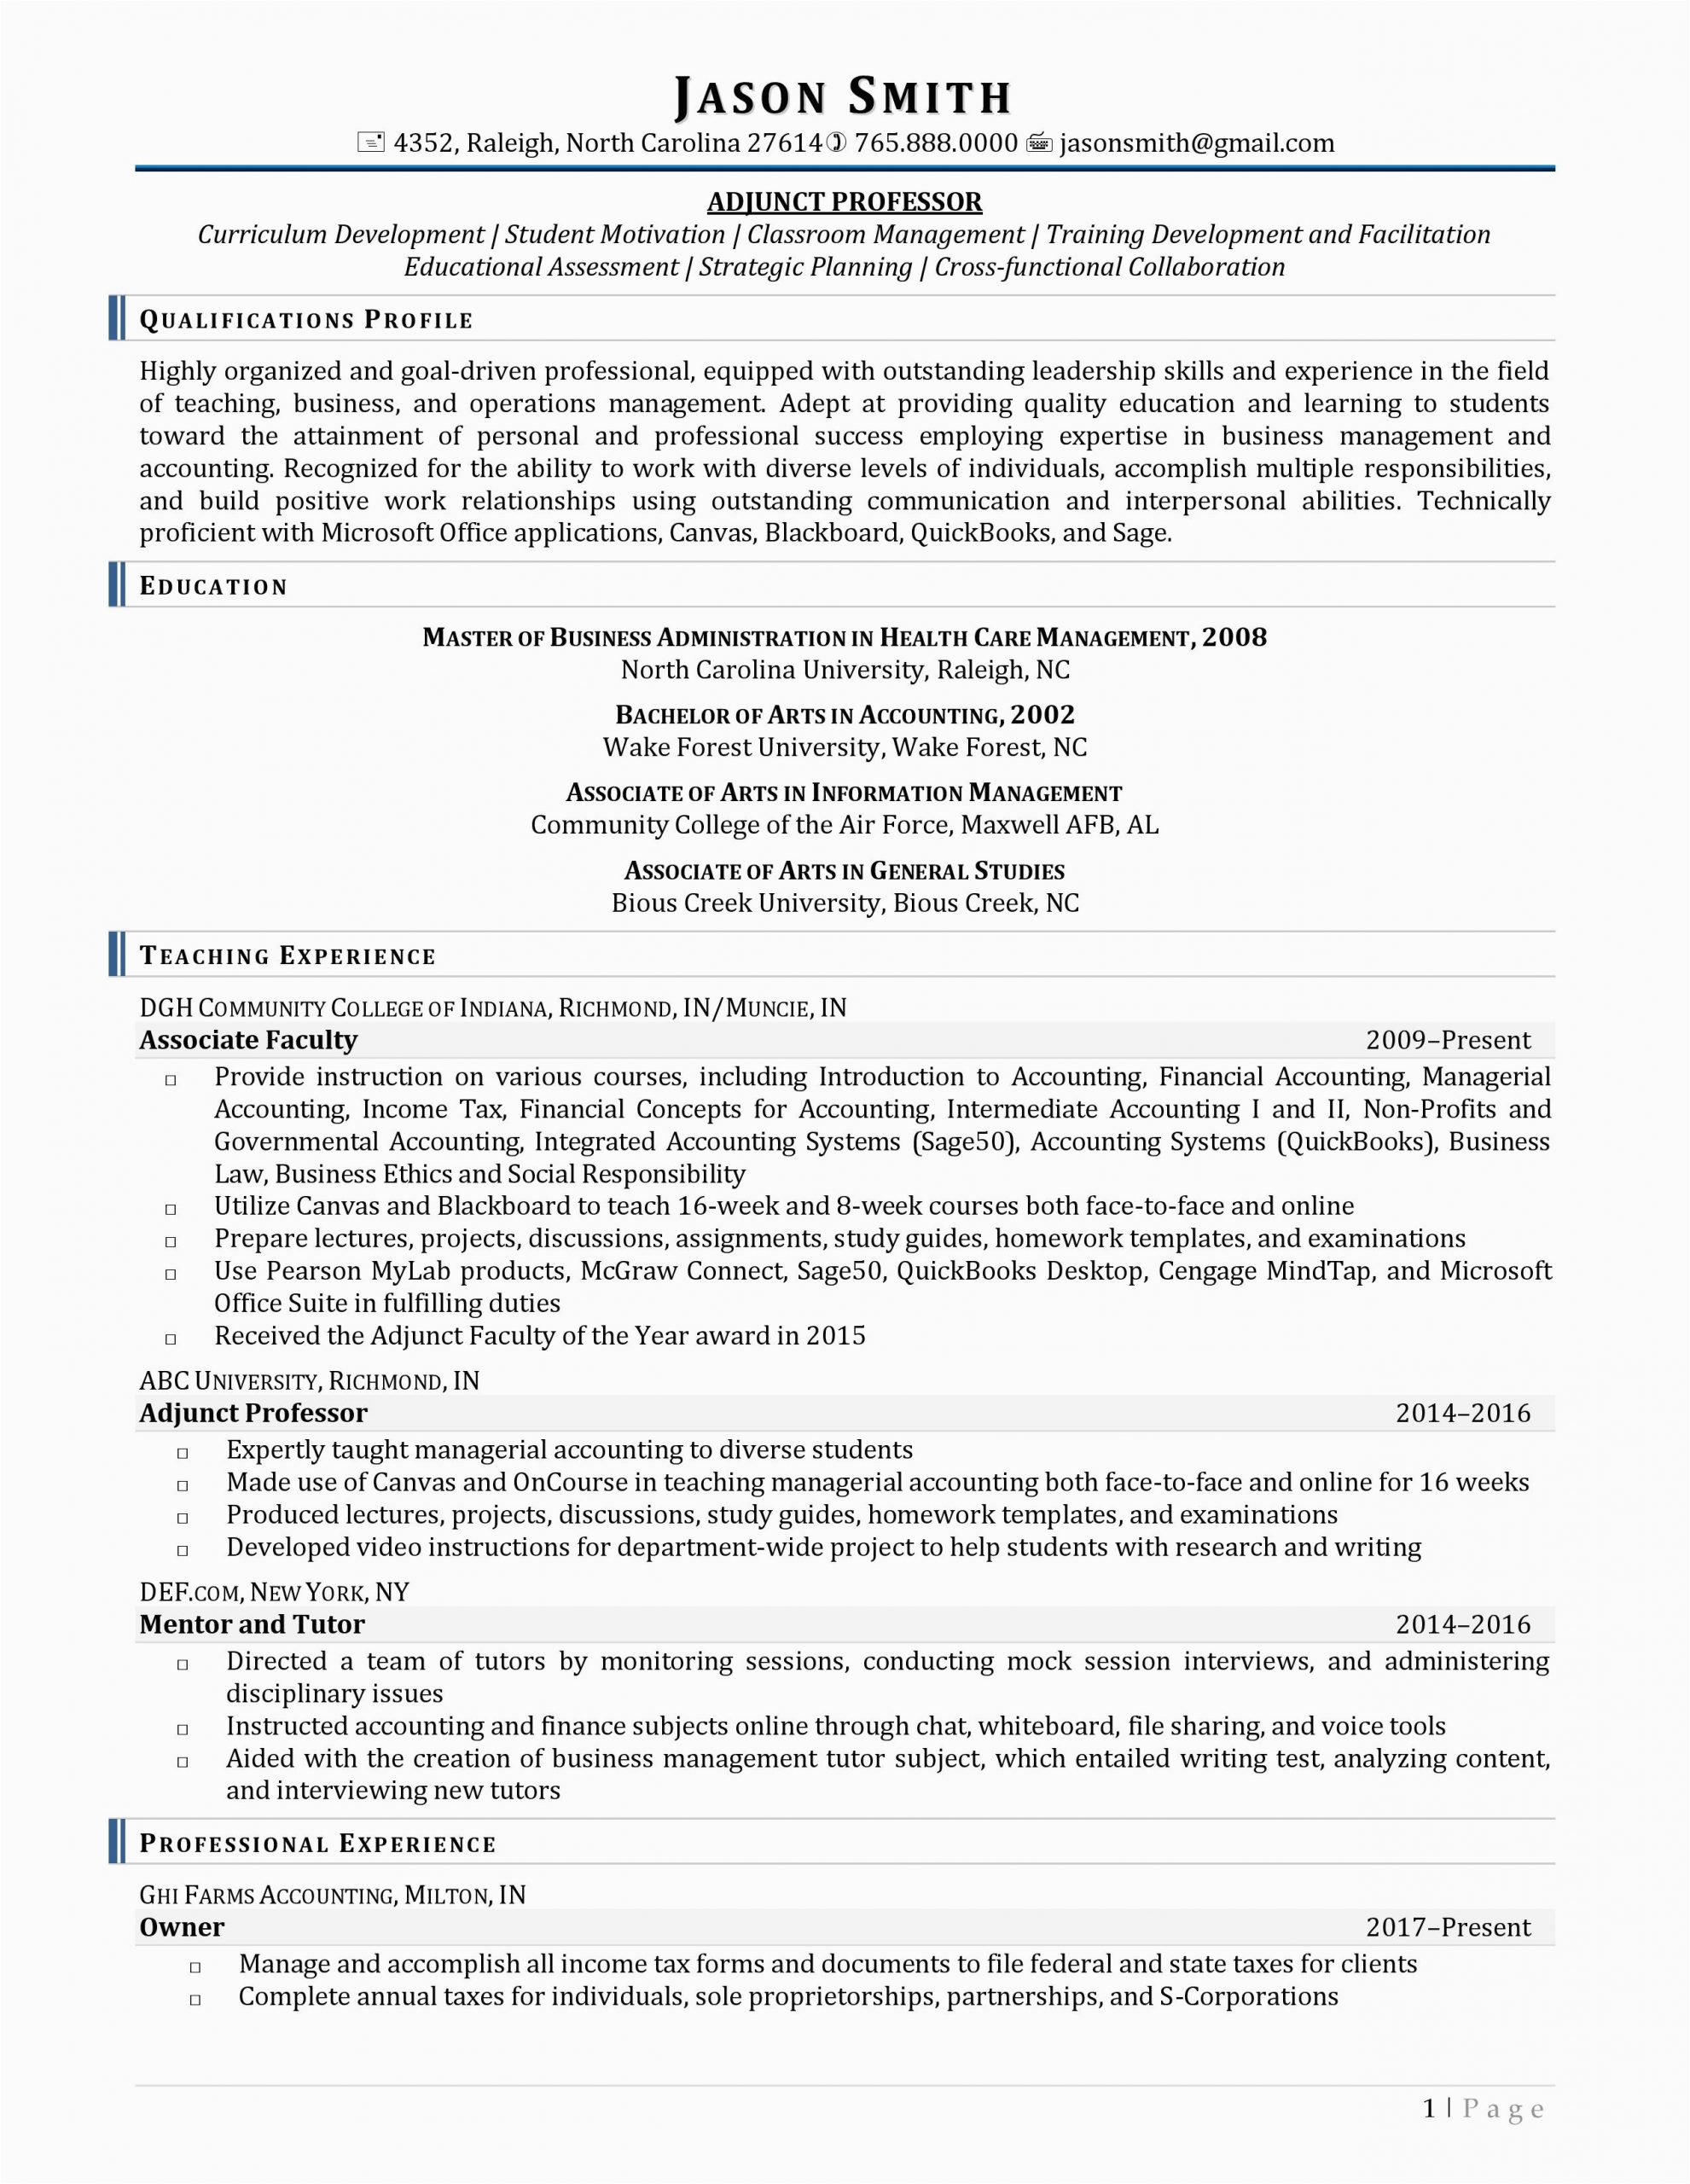 Resume Template for Long Term Employment Long Resume why Resume Length Matters In Your Job Search